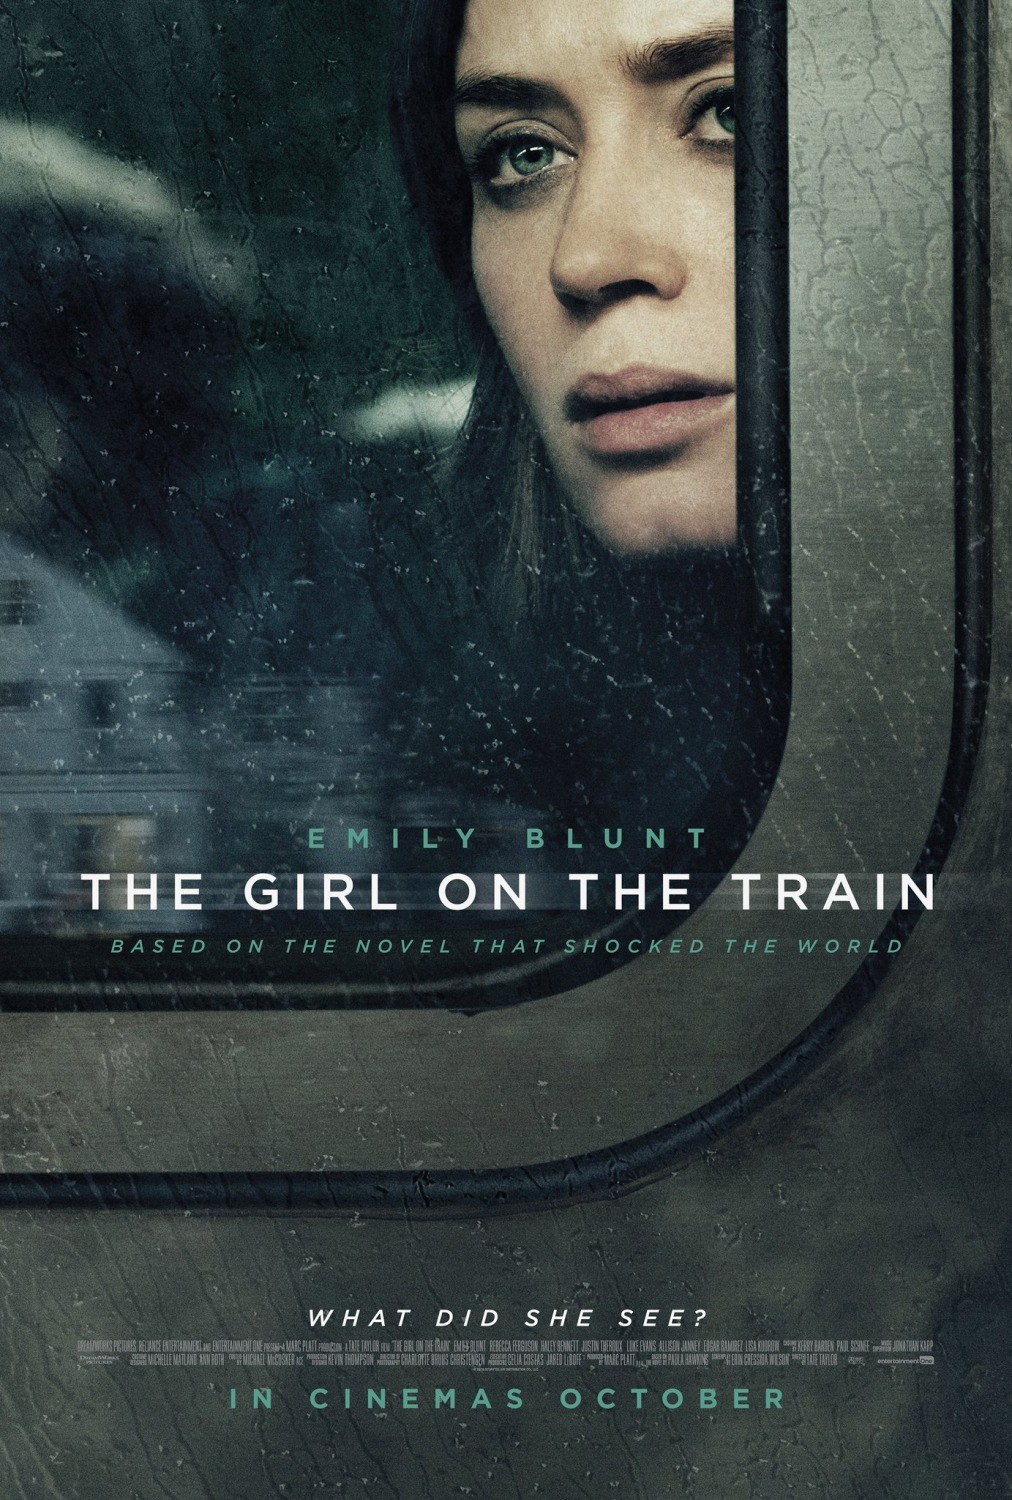 A Simple Favor (film) and The Girl on the Train